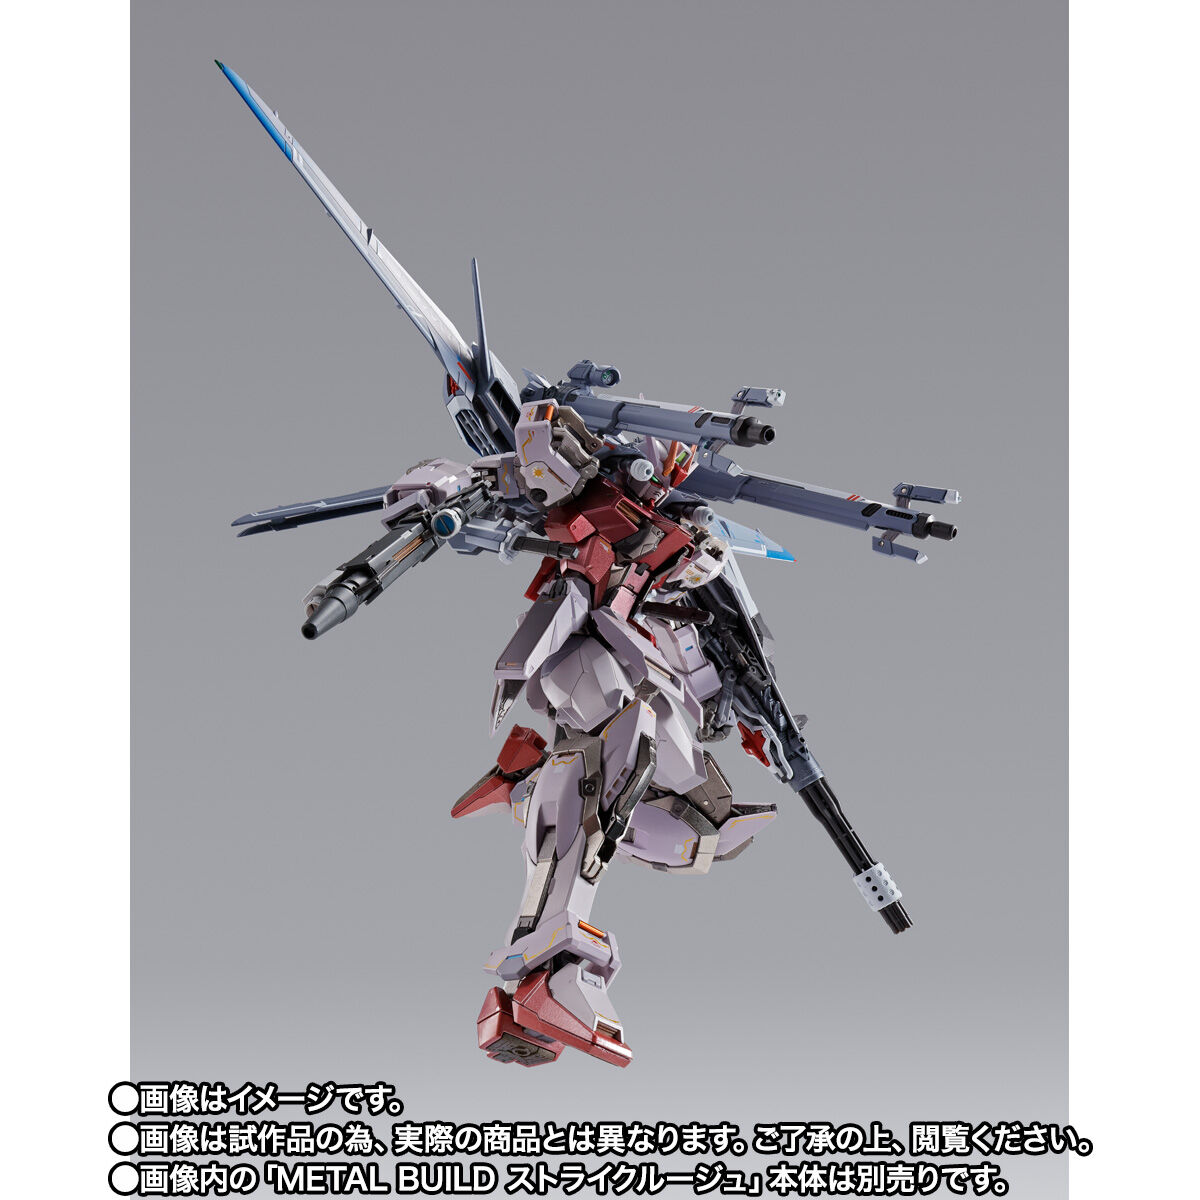 Metal Build P202QX Integrated Weapons Striker Pack for Gundam Seed Series